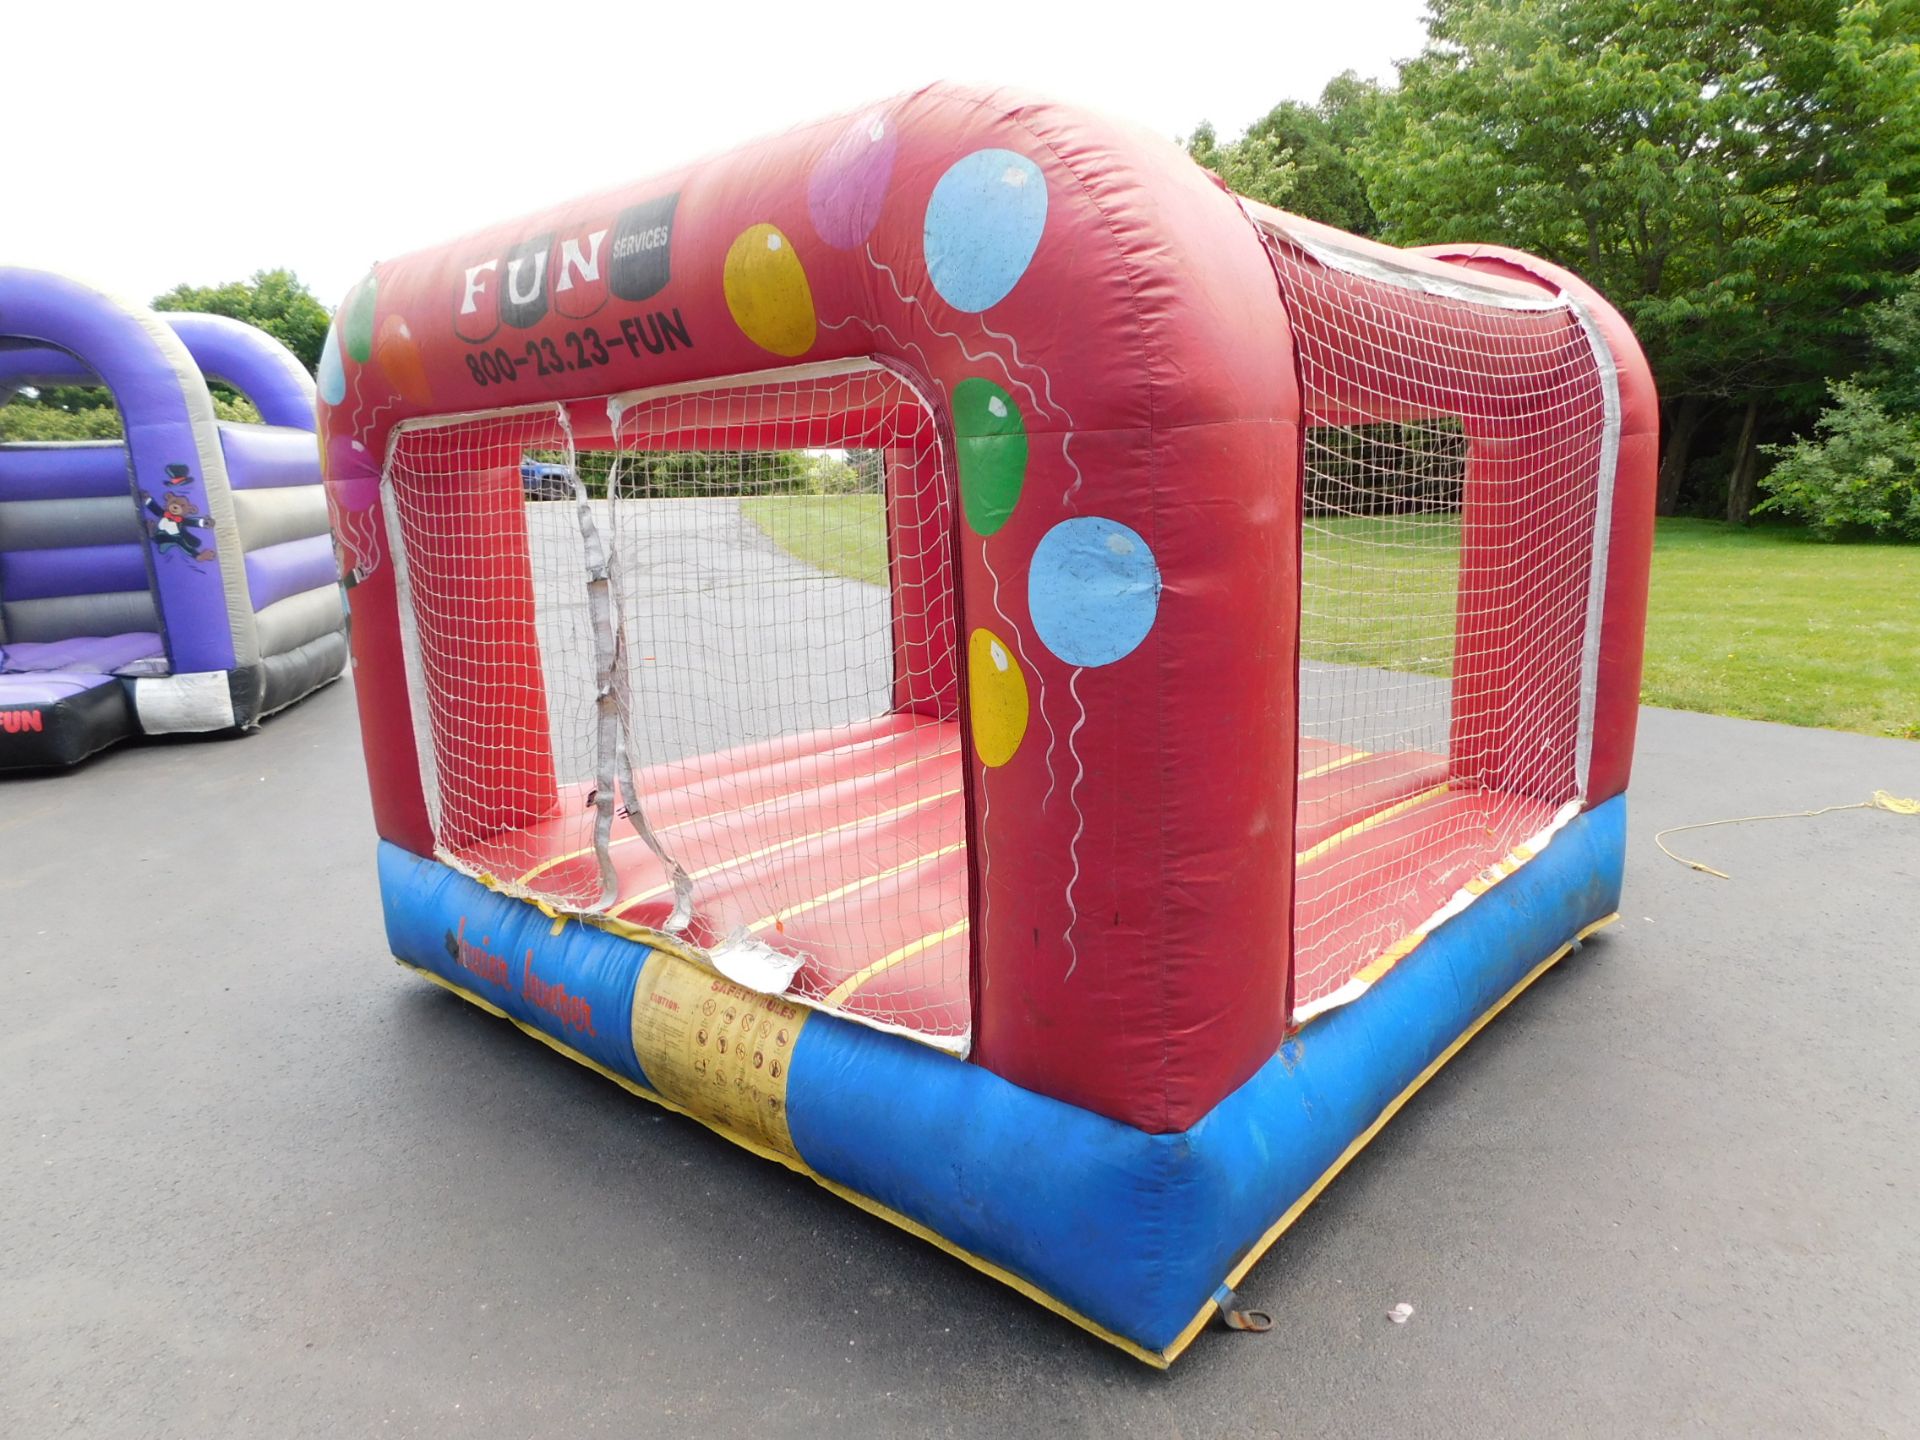 Inflatable Fun Service Bounce House, 1pc. 1 Blower required, Junior Jumper 11'WX11'LX9'H #104 - Image 2 of 12